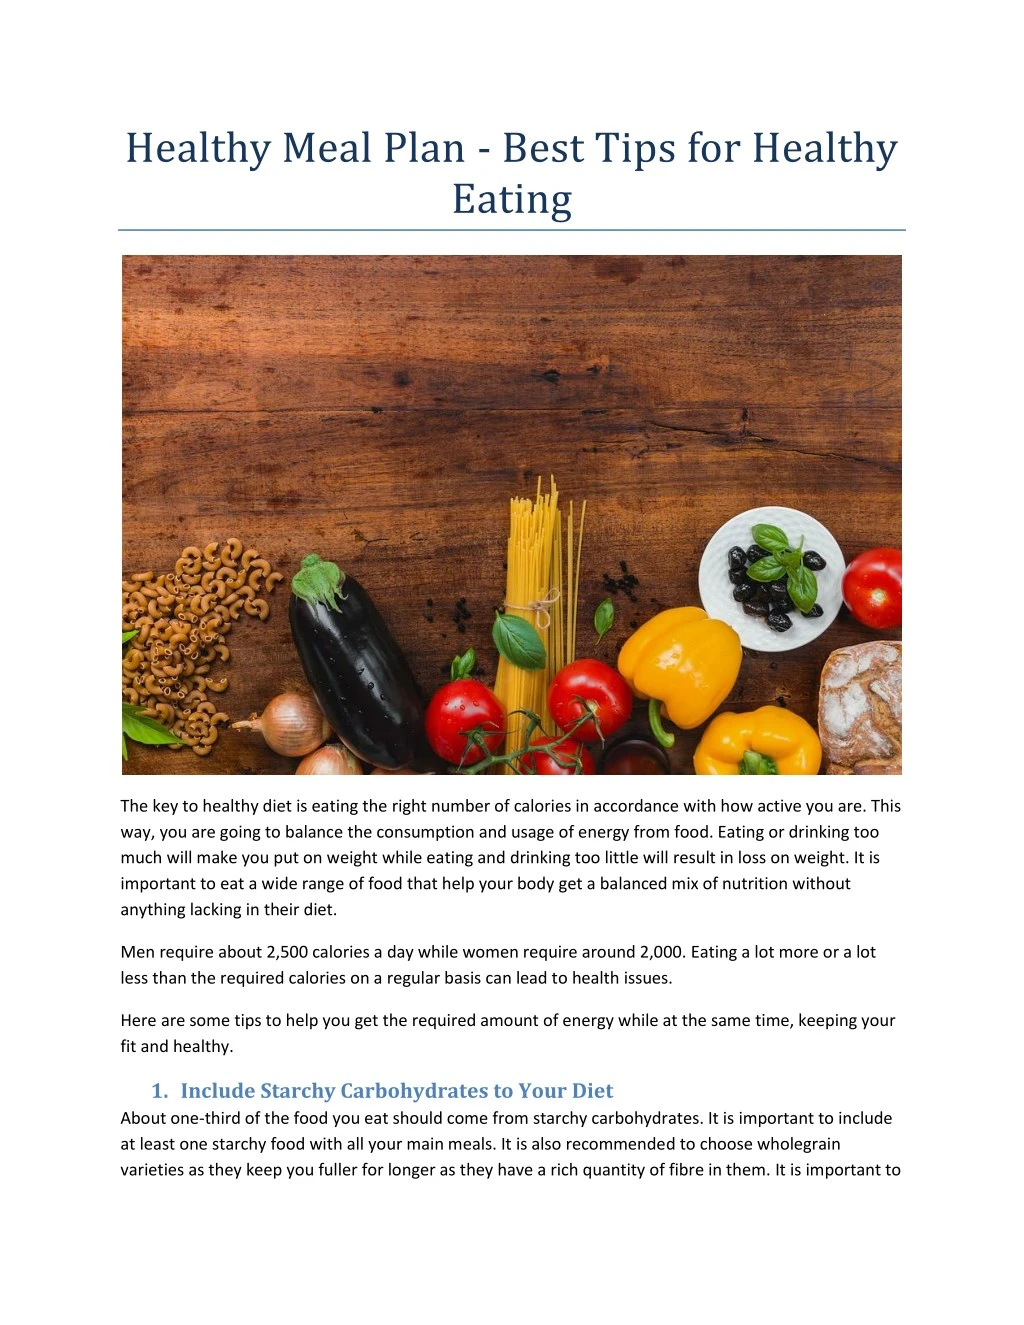 healthy meal plan best tips for healthy eating